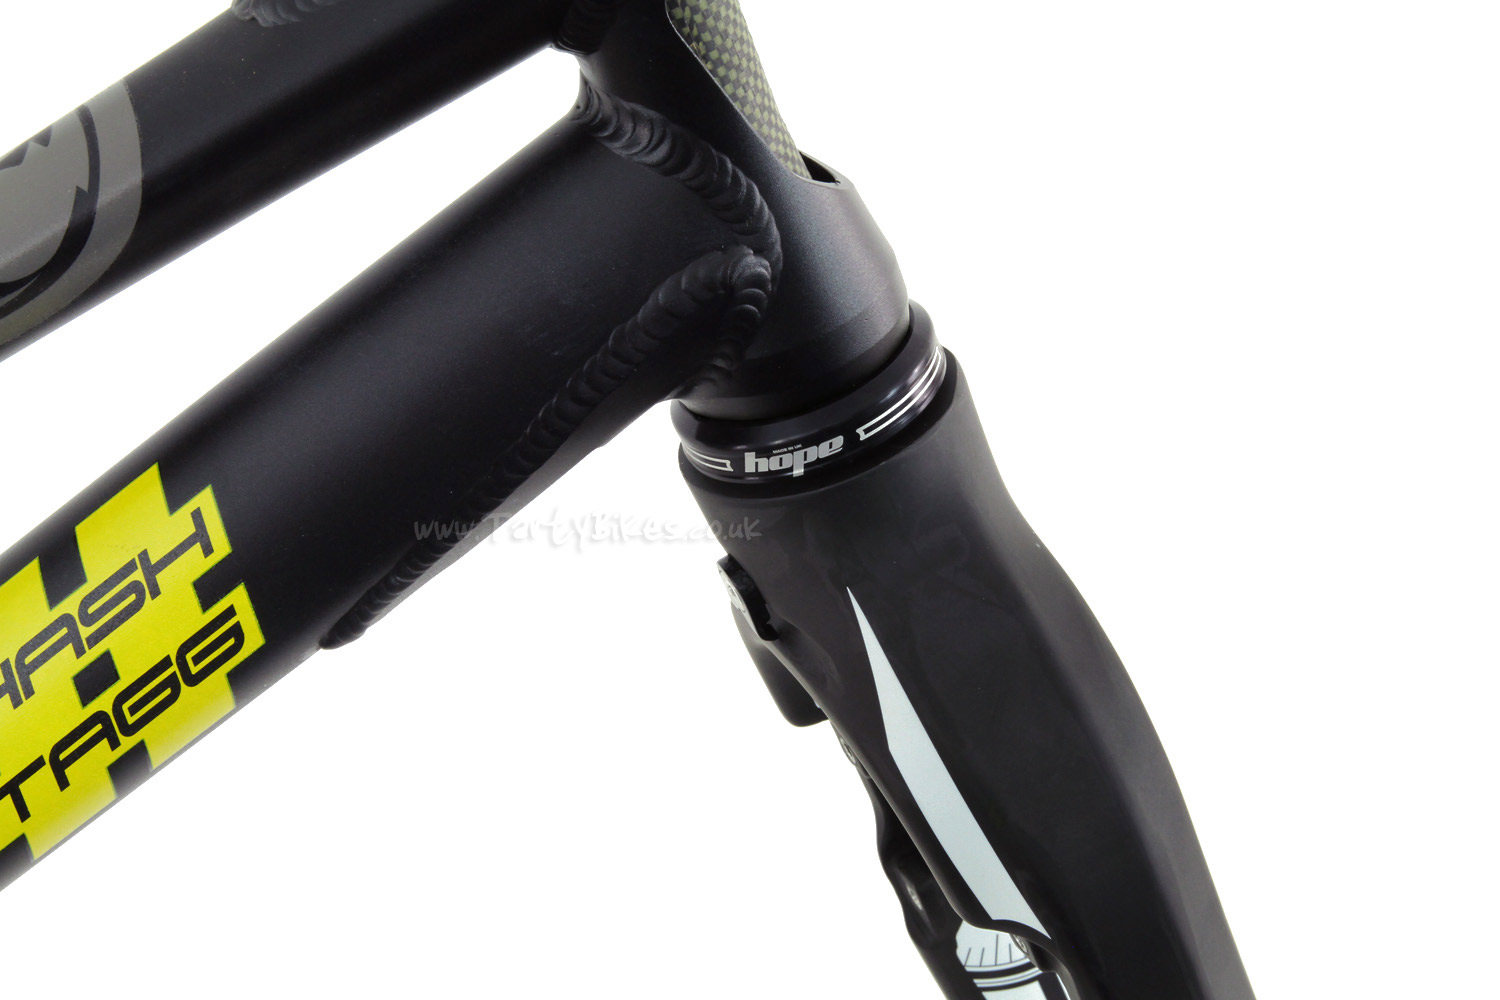 straight head tube with tapered fork